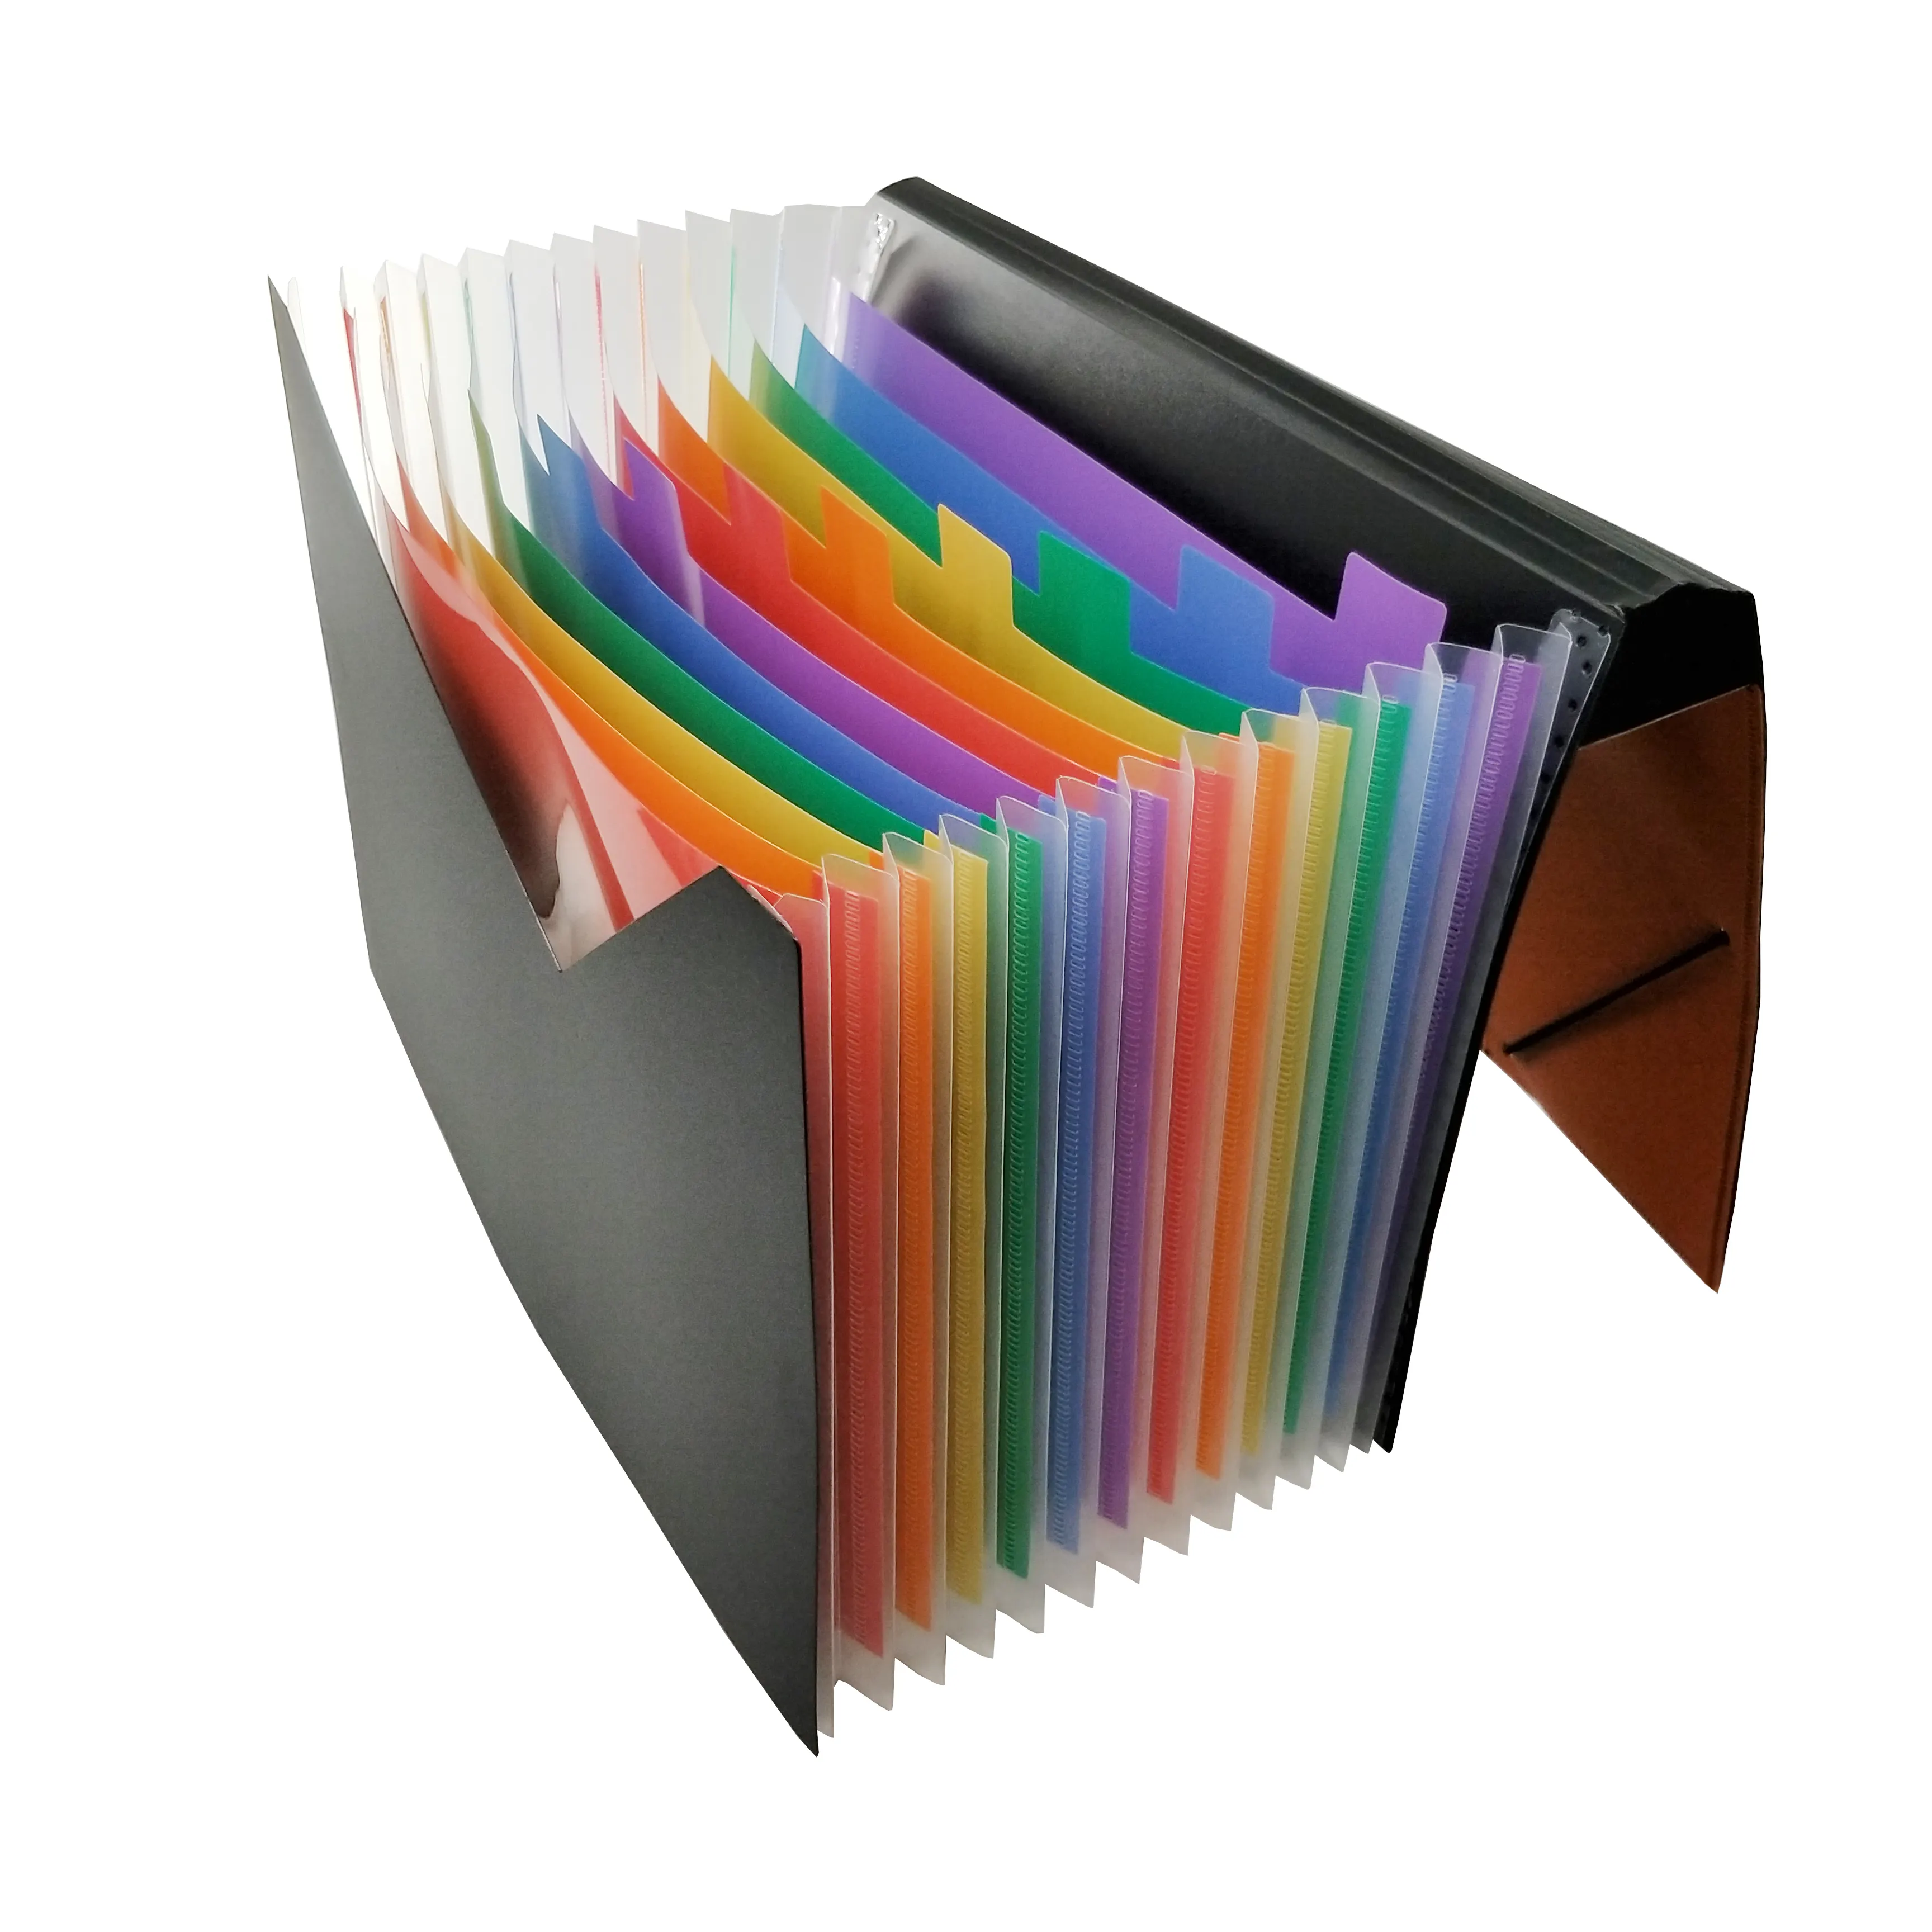 Portable File Holder Expanding Accordion File Folder With Flap And Cord Closure